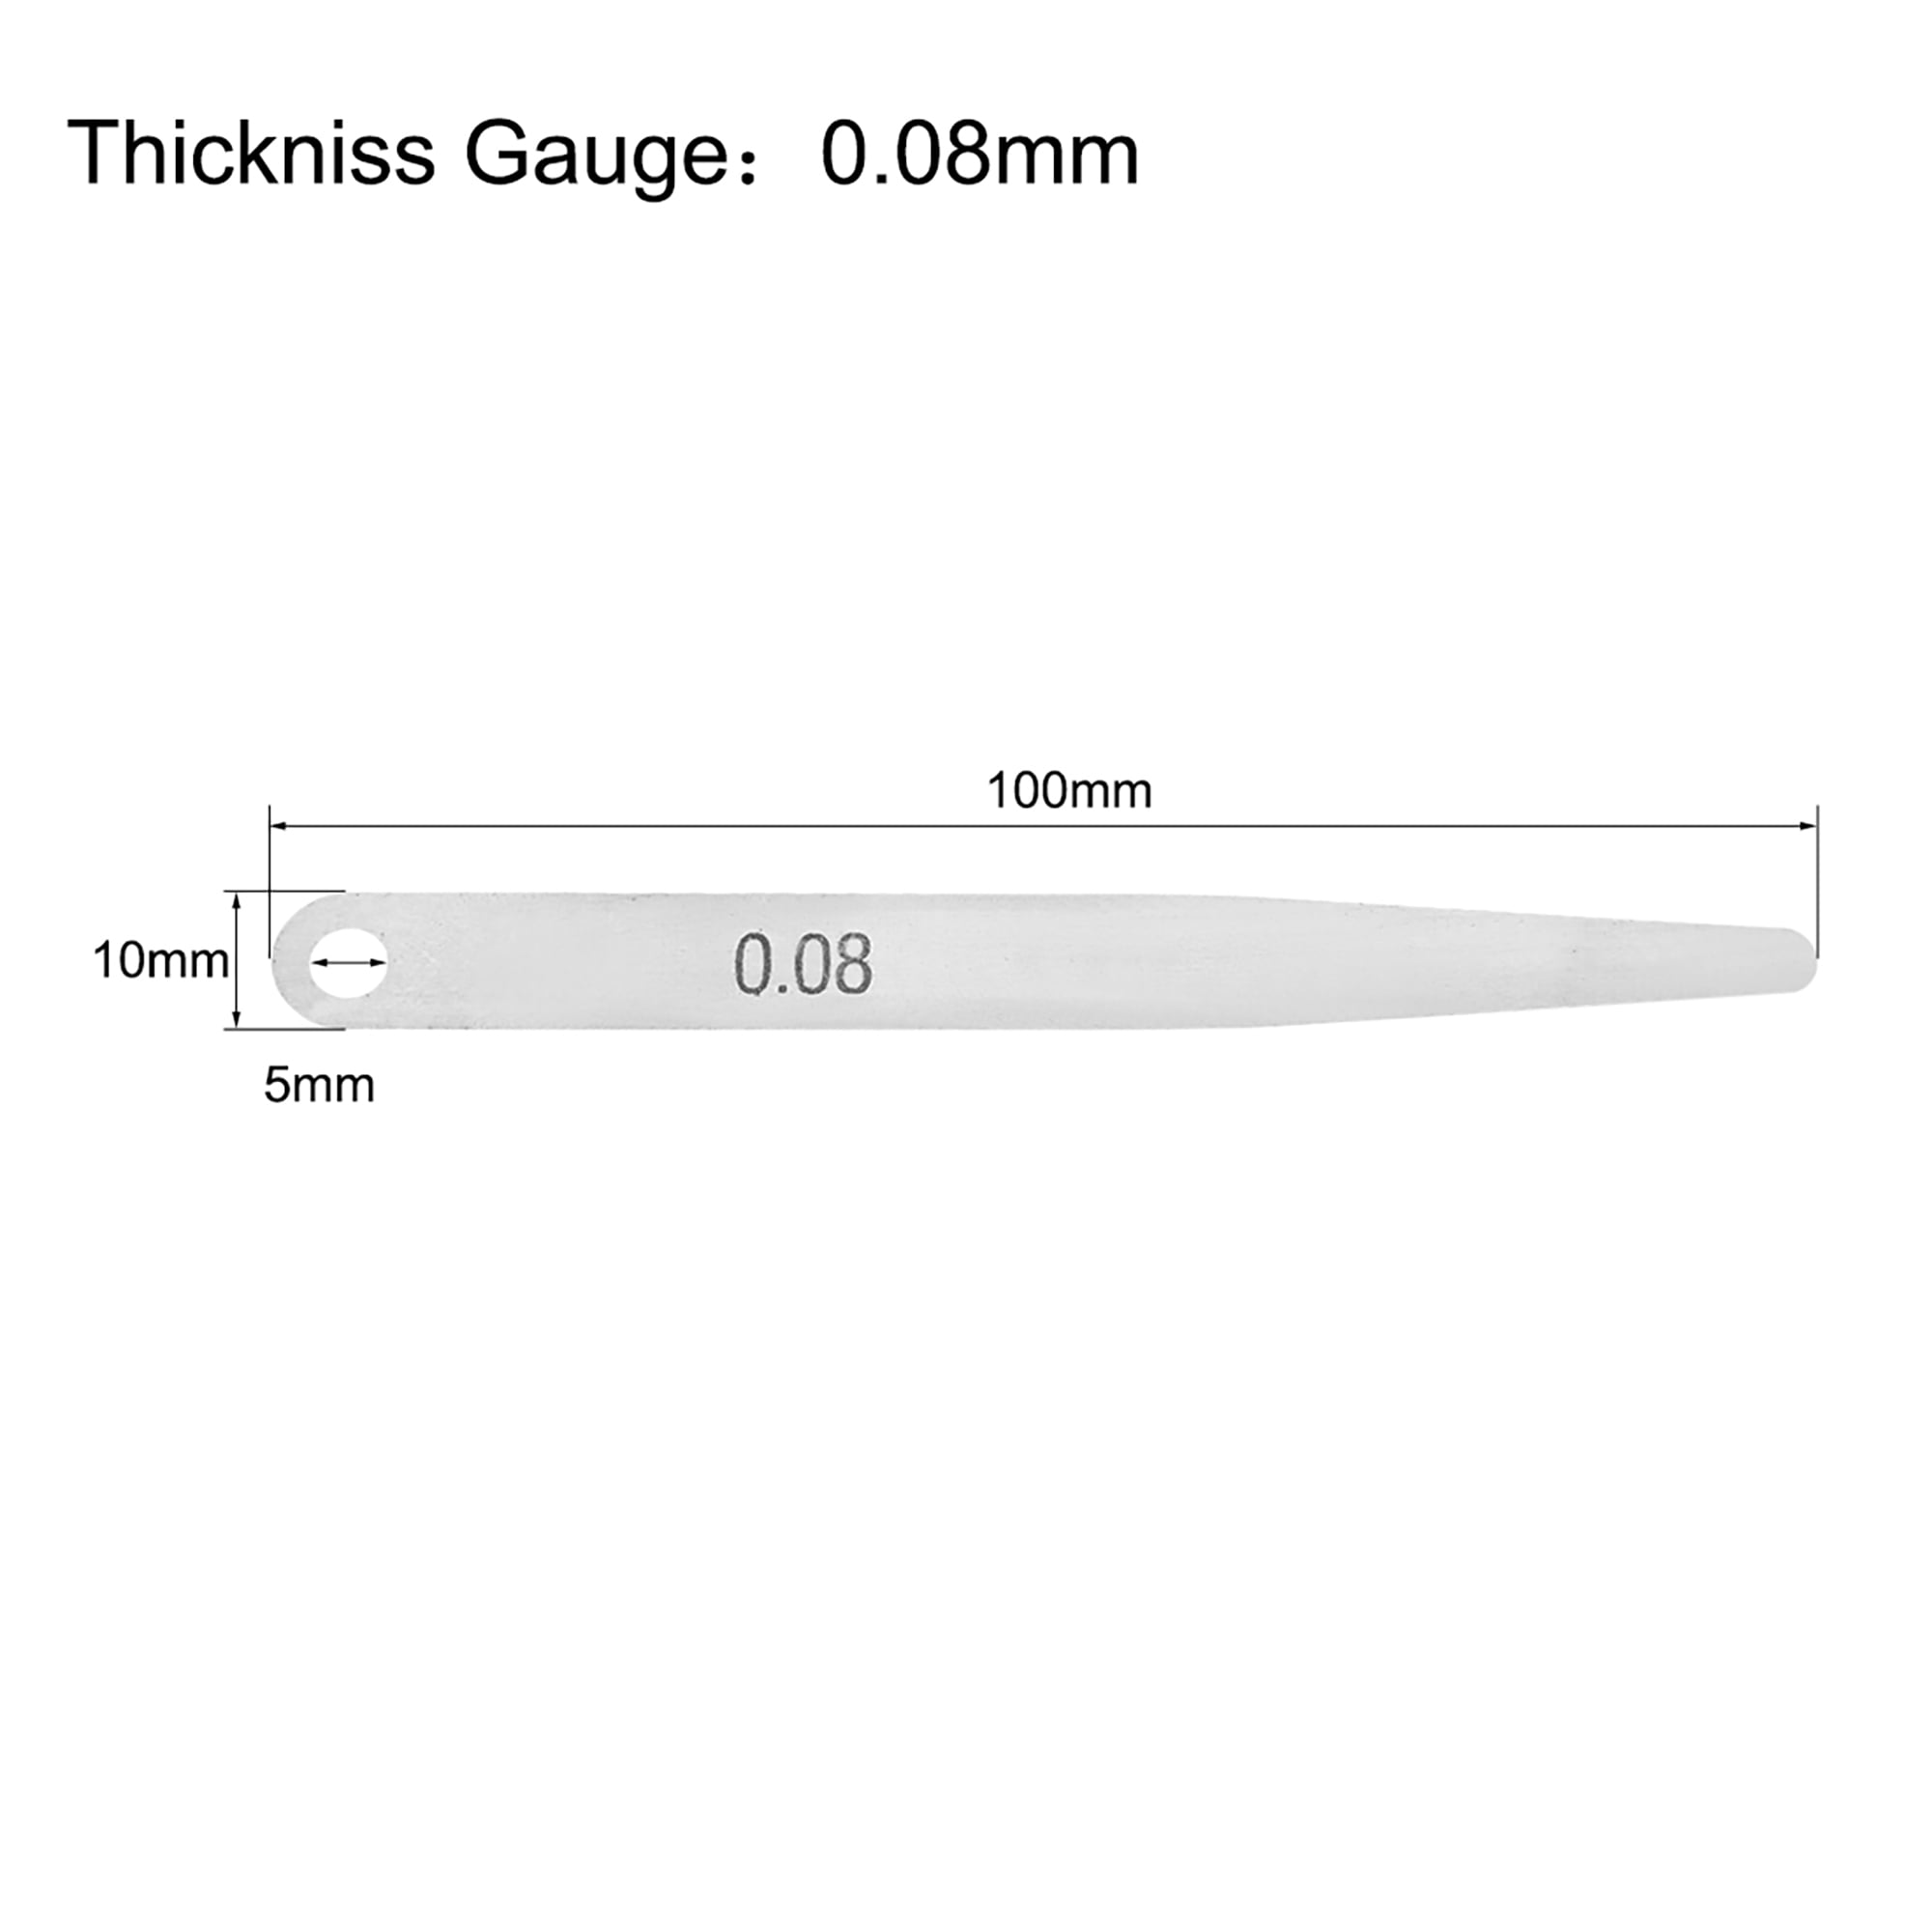 uxcell Metric Thickness Feeler Gauge 0.08mm Stainless Steel Measuring Tool for Gap Width 2pcs 